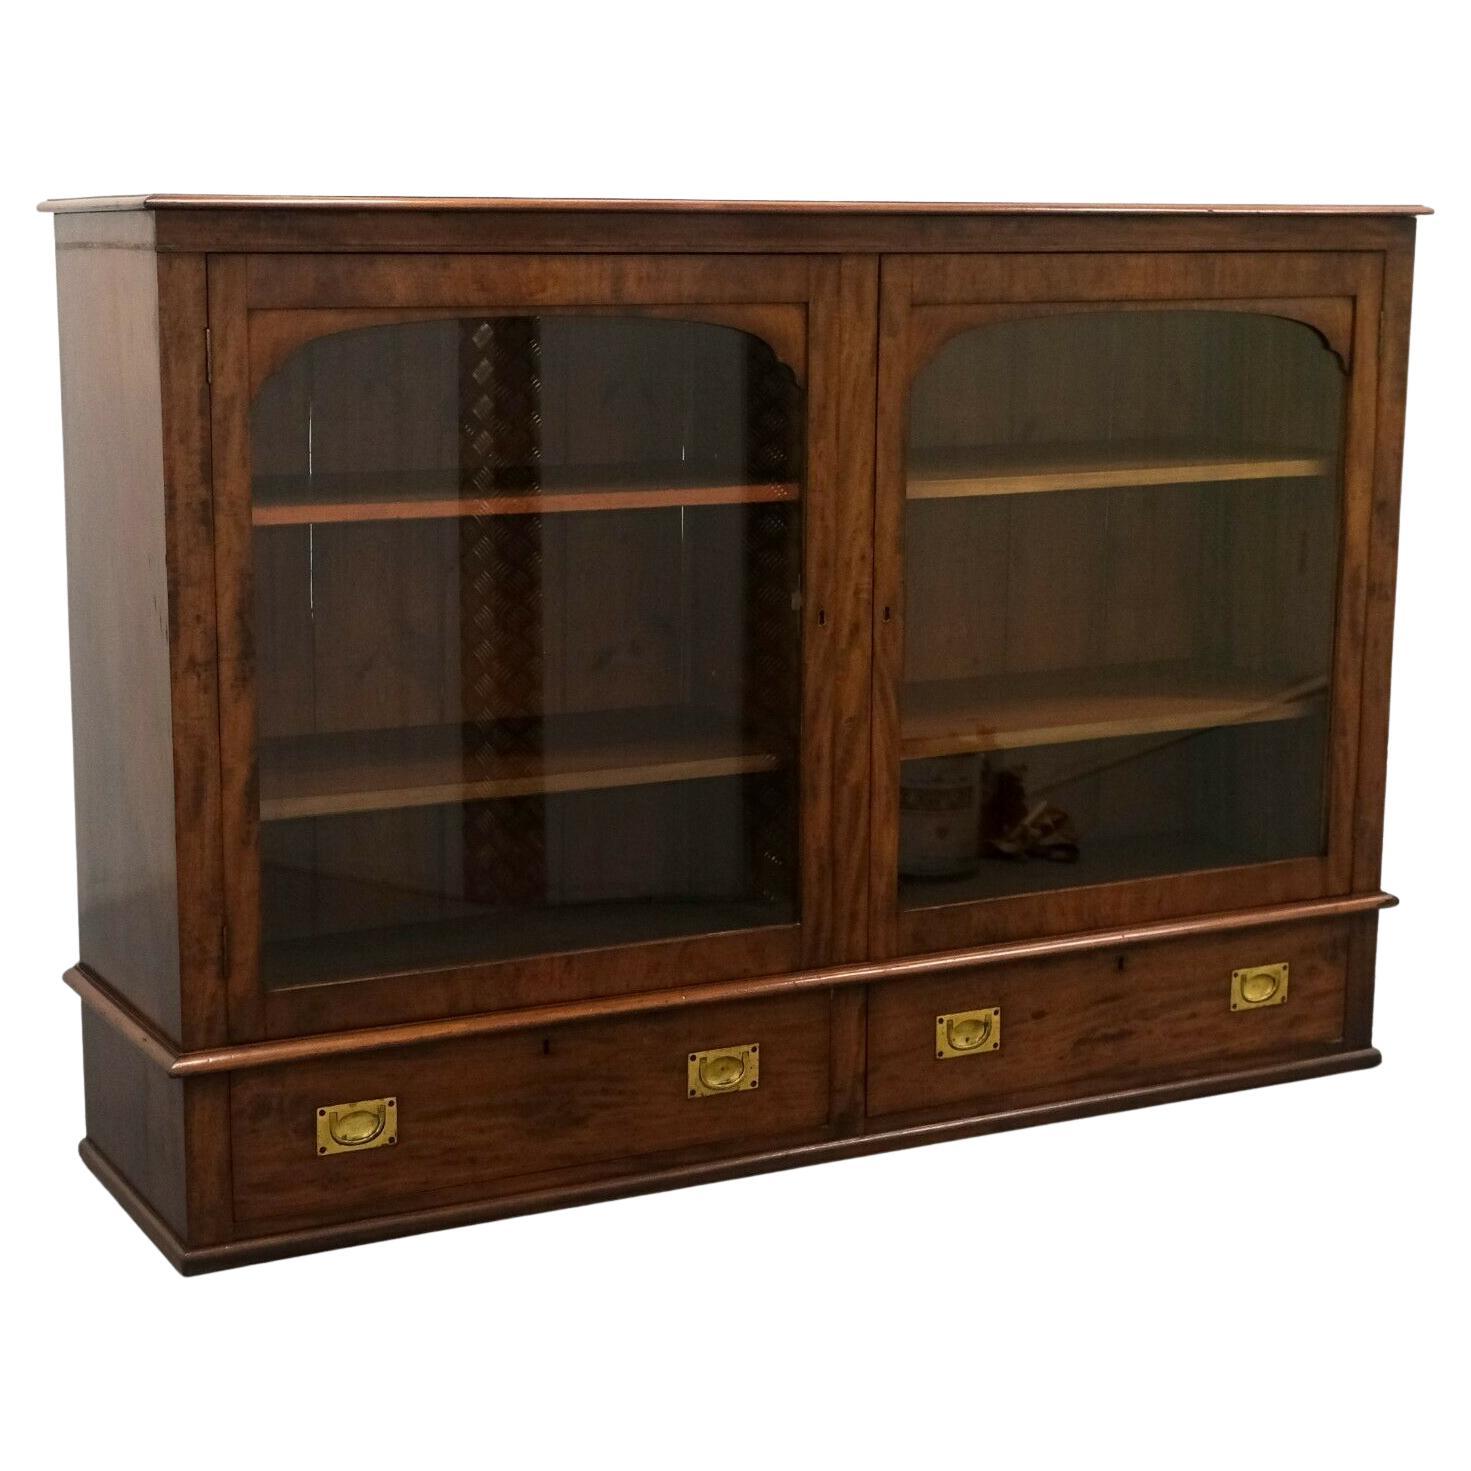 Victorian Brown Hardwood Two Doors Glazed Bookcase with Campaign Drawers